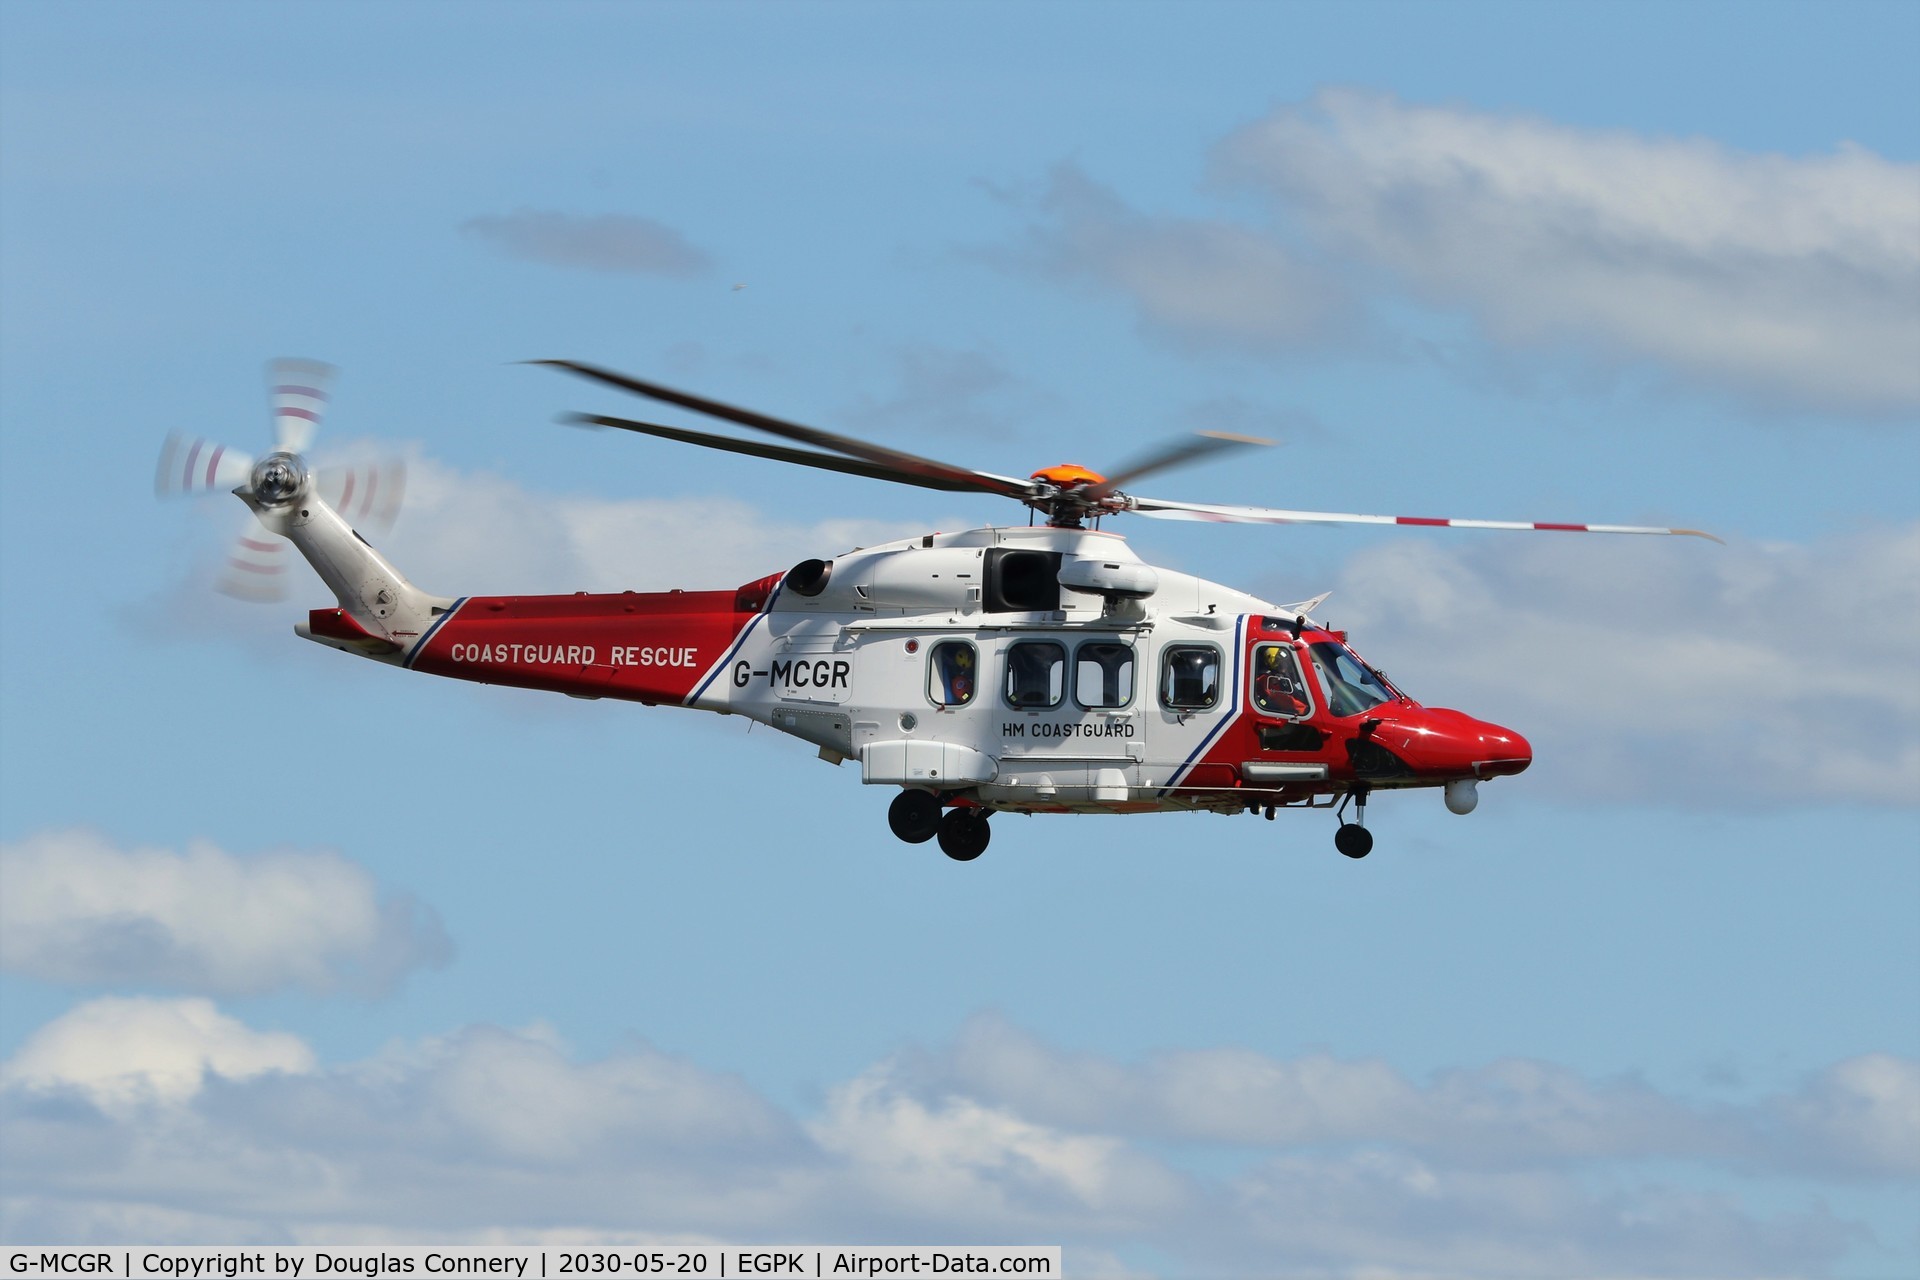 G-MCGR, 2014 AgustaWestland AW189 C/N 92004, Departing Prestwick on another training sortie